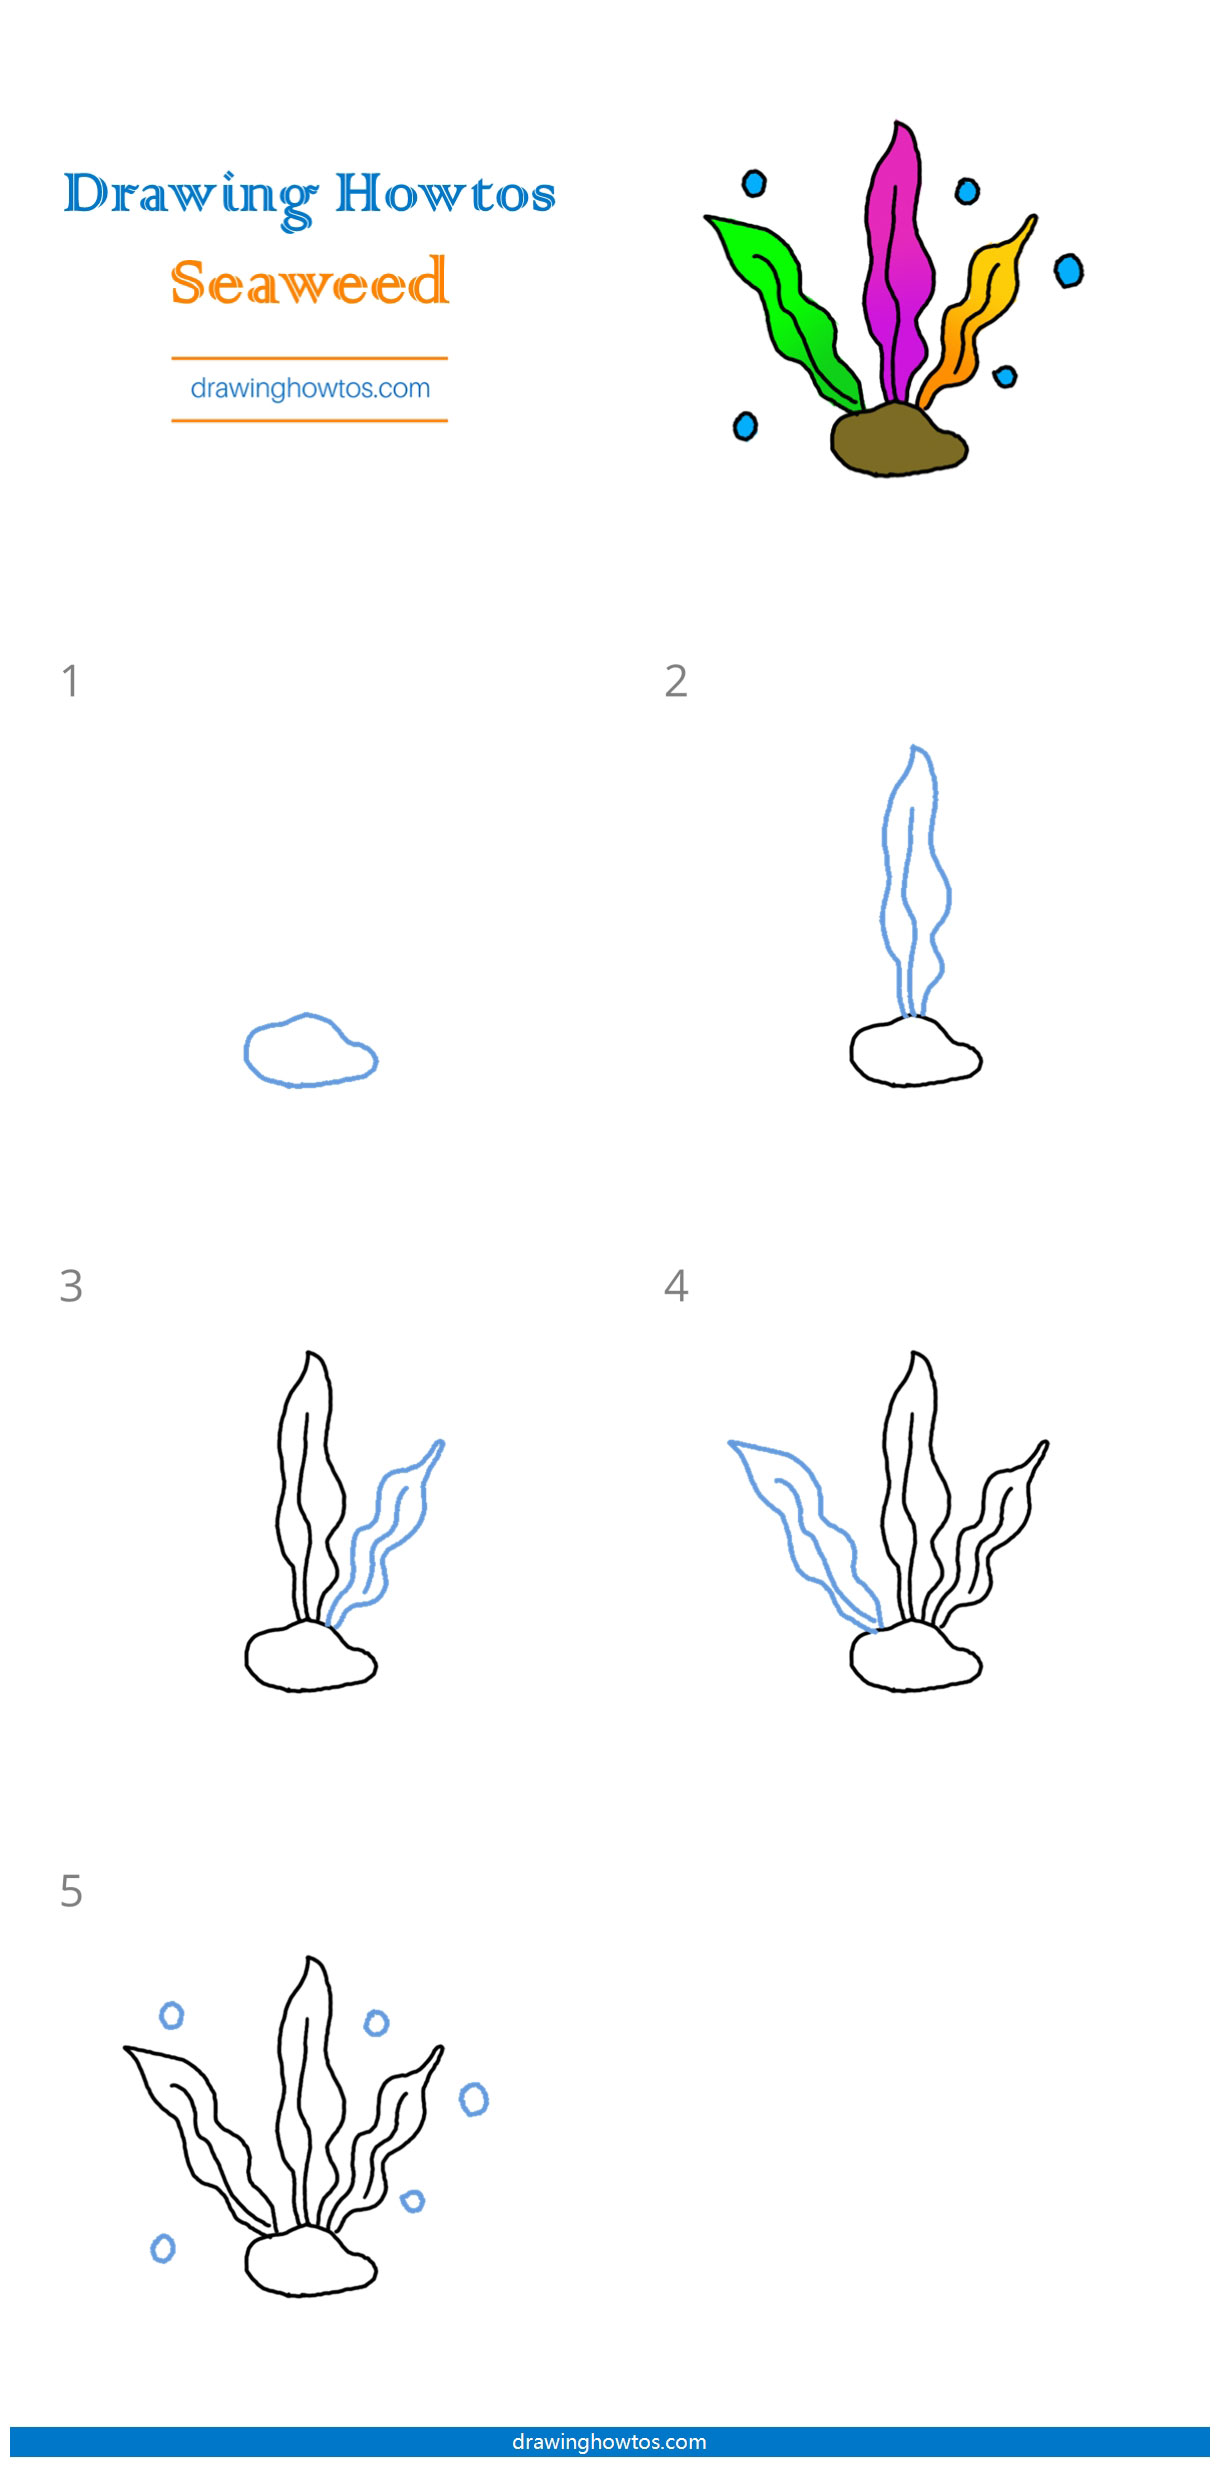 How to Draw Seaweed Step by Step